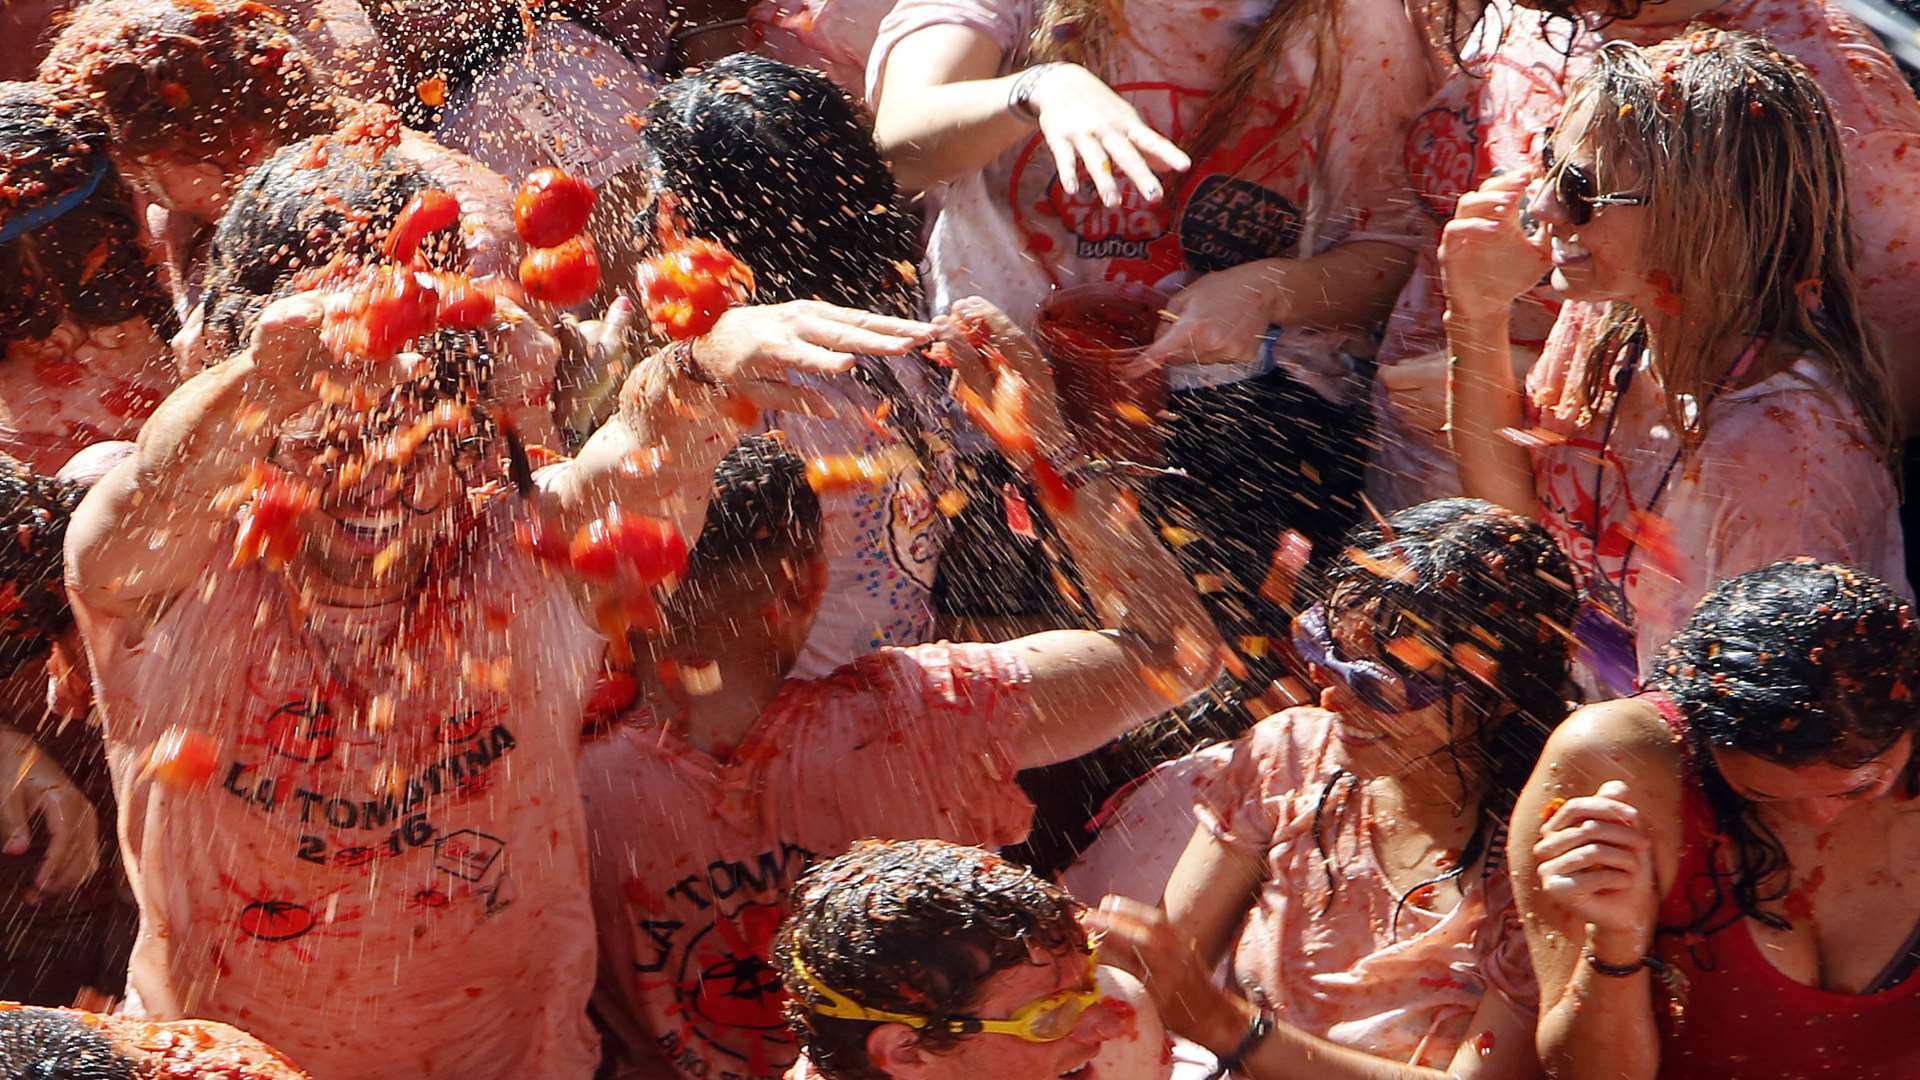 The annual Tomatina, tomato fight fiesta takes place just outside Valencia